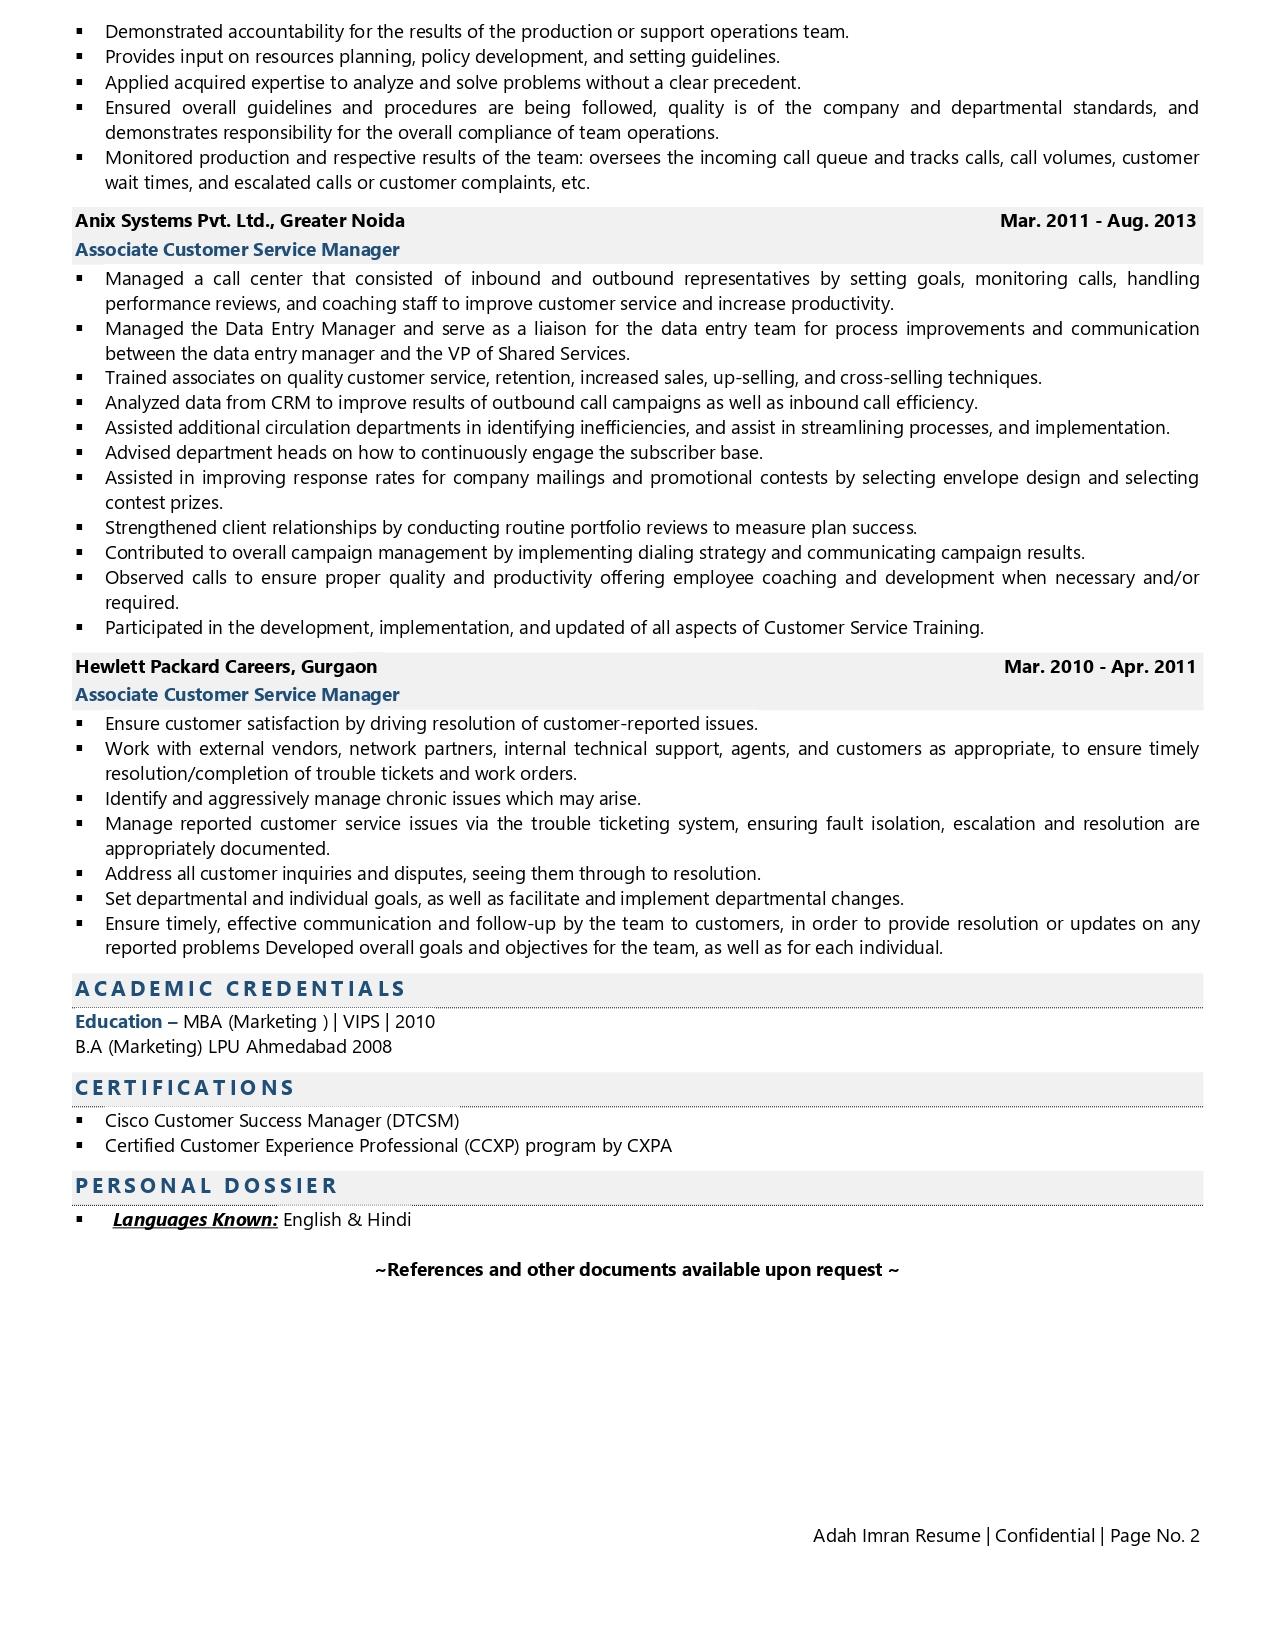 professional summary for resume customer service manager